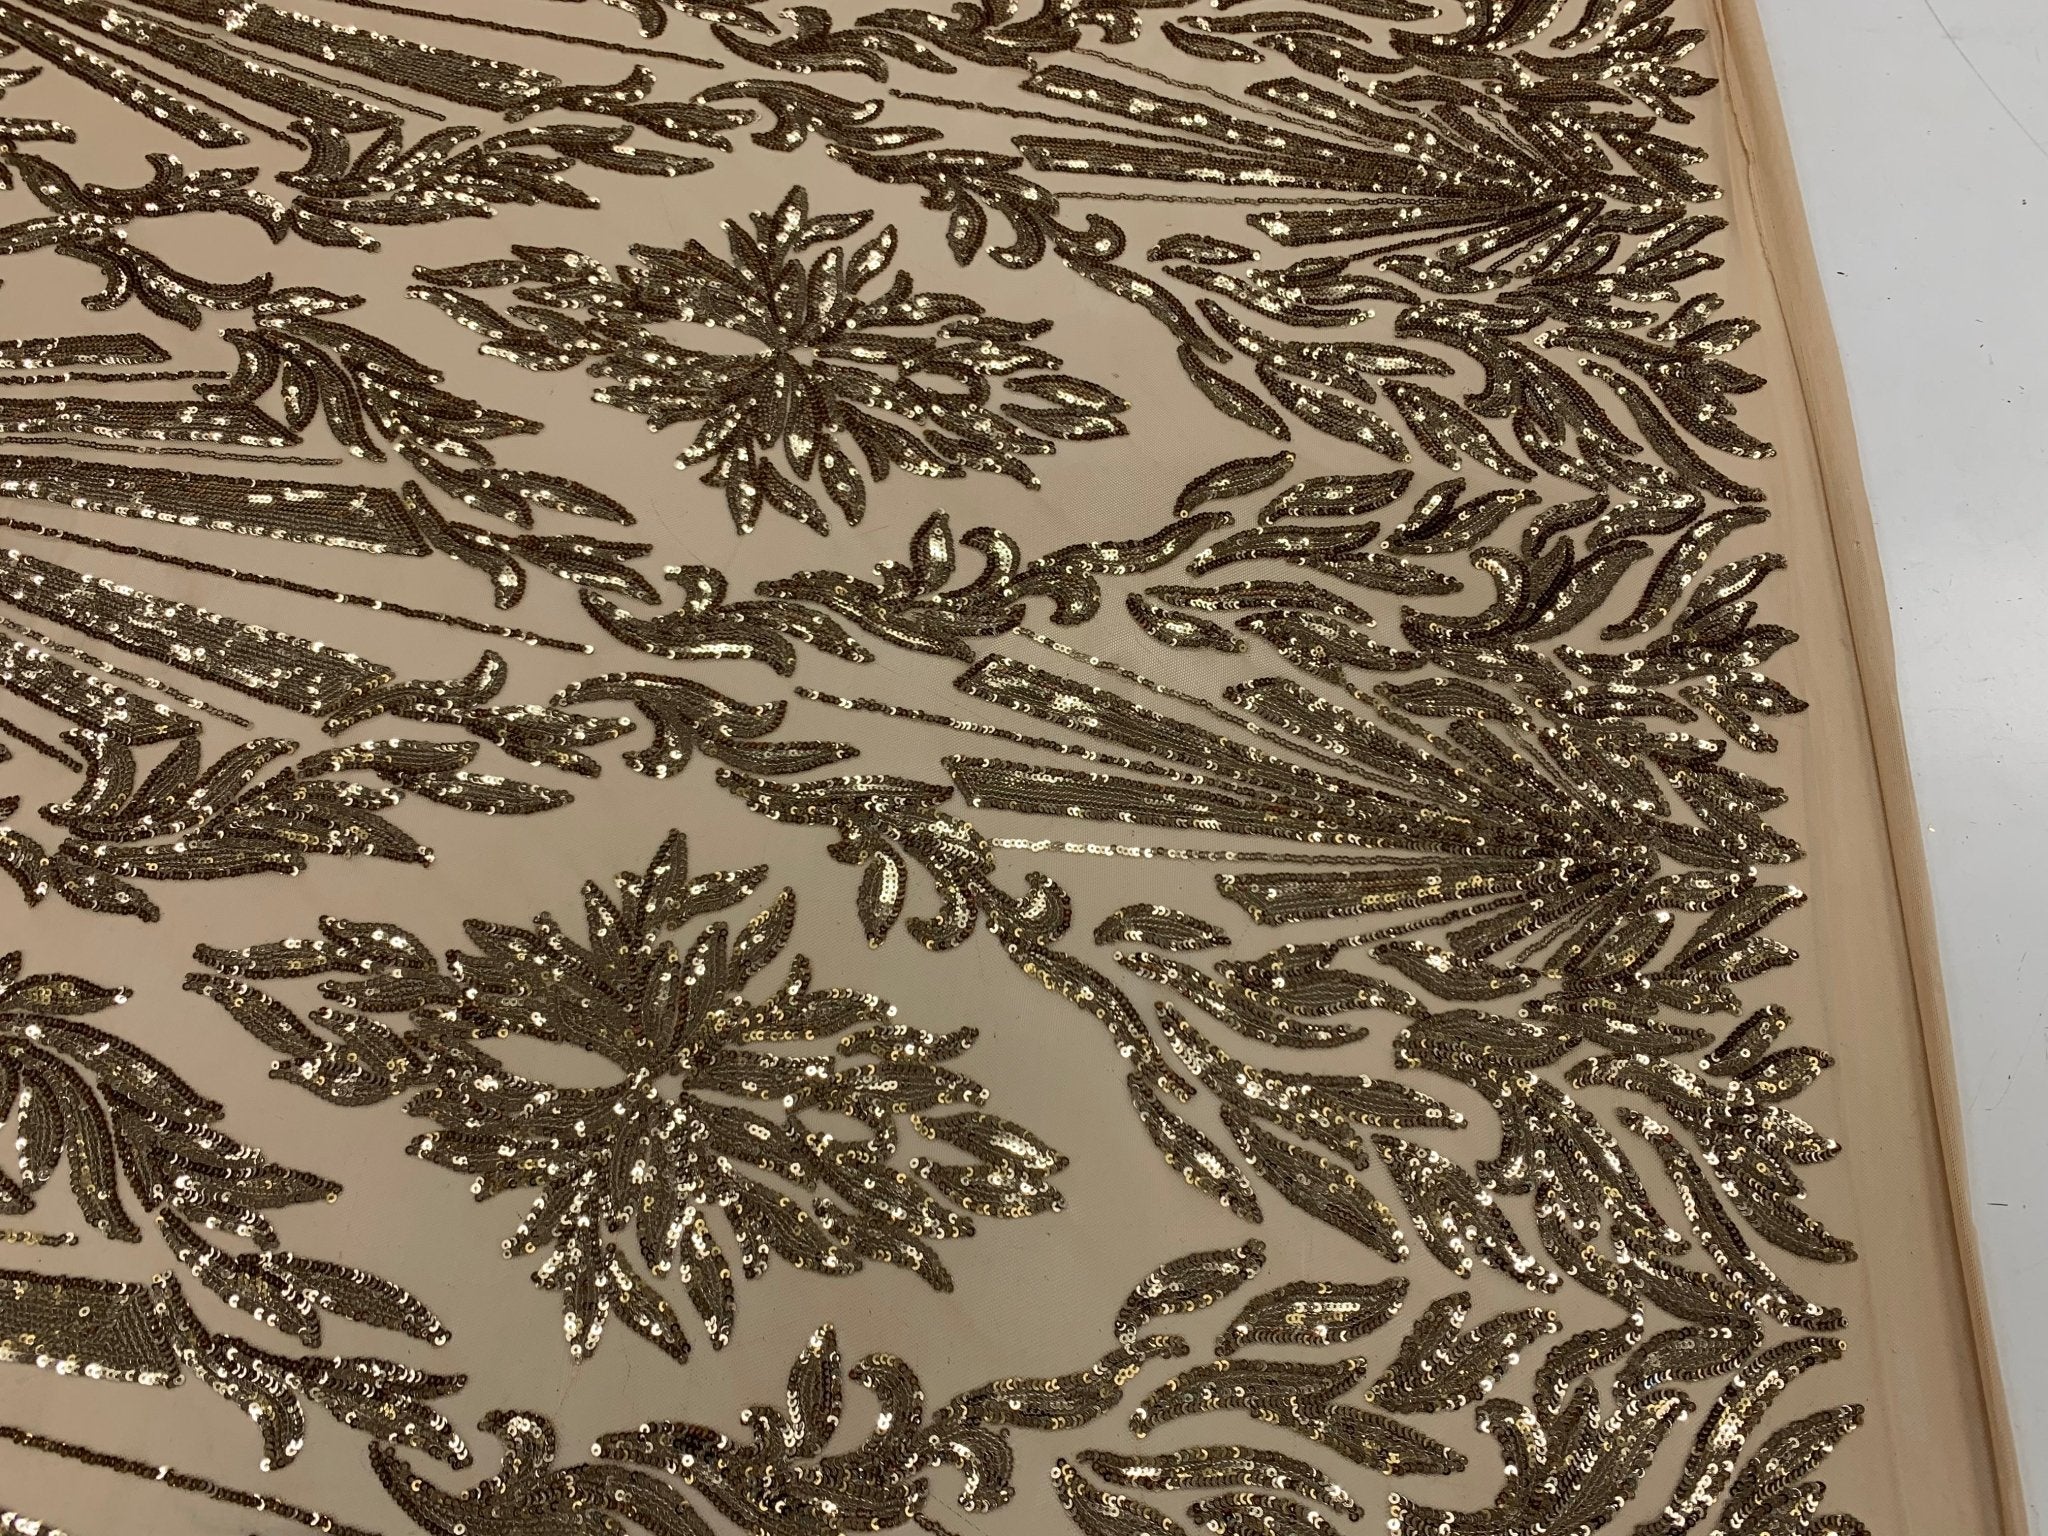 French Embroidery Stretch Sequins Fabric By The Yard on a Mesh LaceICEFABRICICE FABRICSGoldFrench Embroidery Stretch Sequins Fabric By The Yard on a Mesh Lace ICEFABRIC Gold